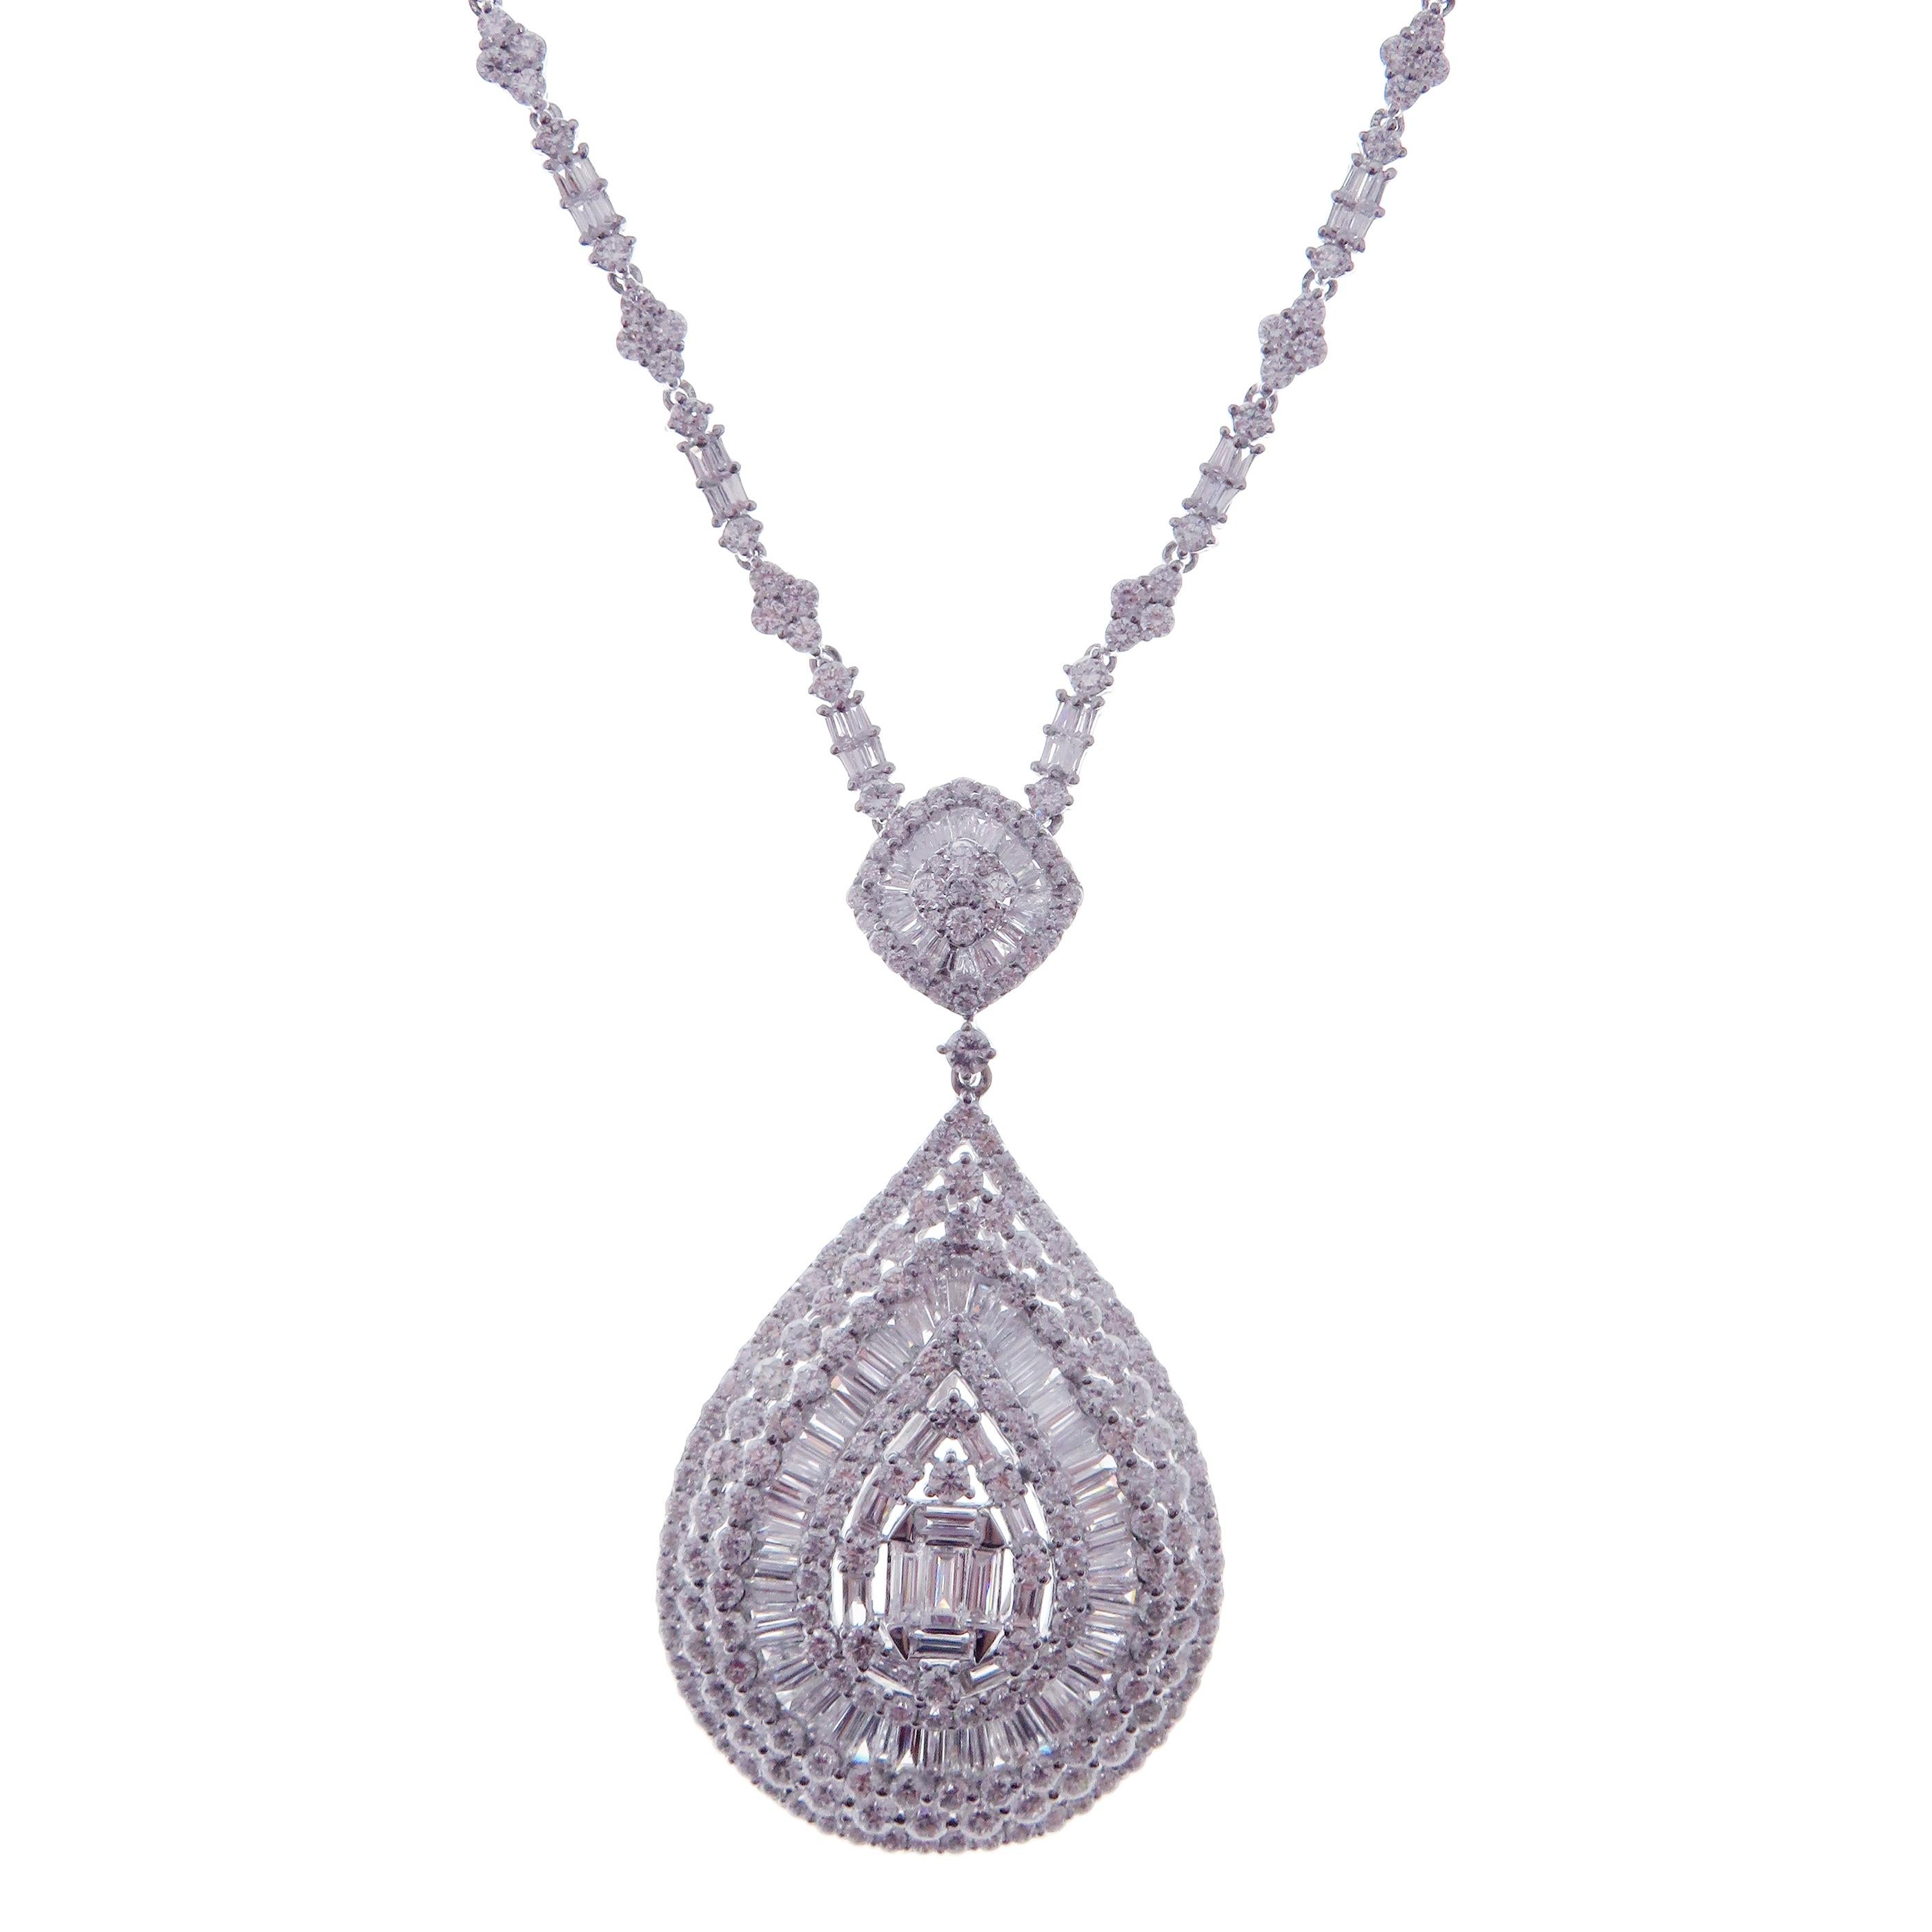 This solid pear baguette necklace is crafted in 18-karat white gold, weighing approximately 11.78 total carats of V Quality white diamond. These are very comfortable, flexible, and lay flat. We have these in matching earrings as well. 

Necklace is